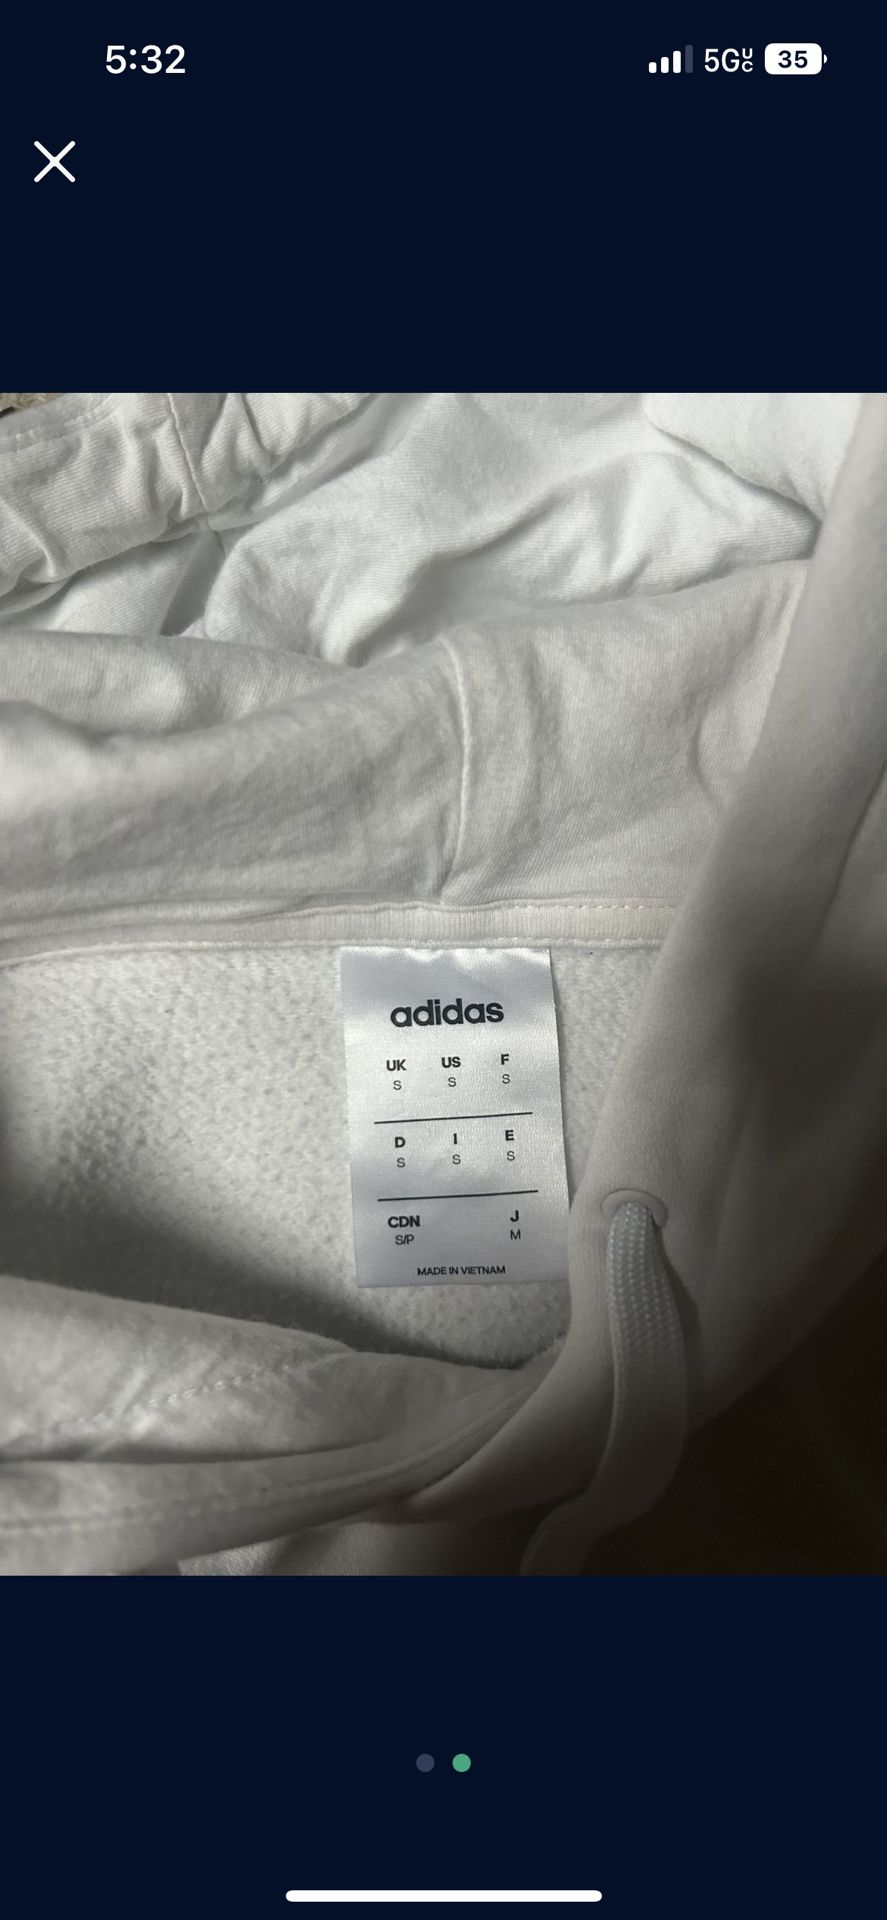 adidas hoodie size s